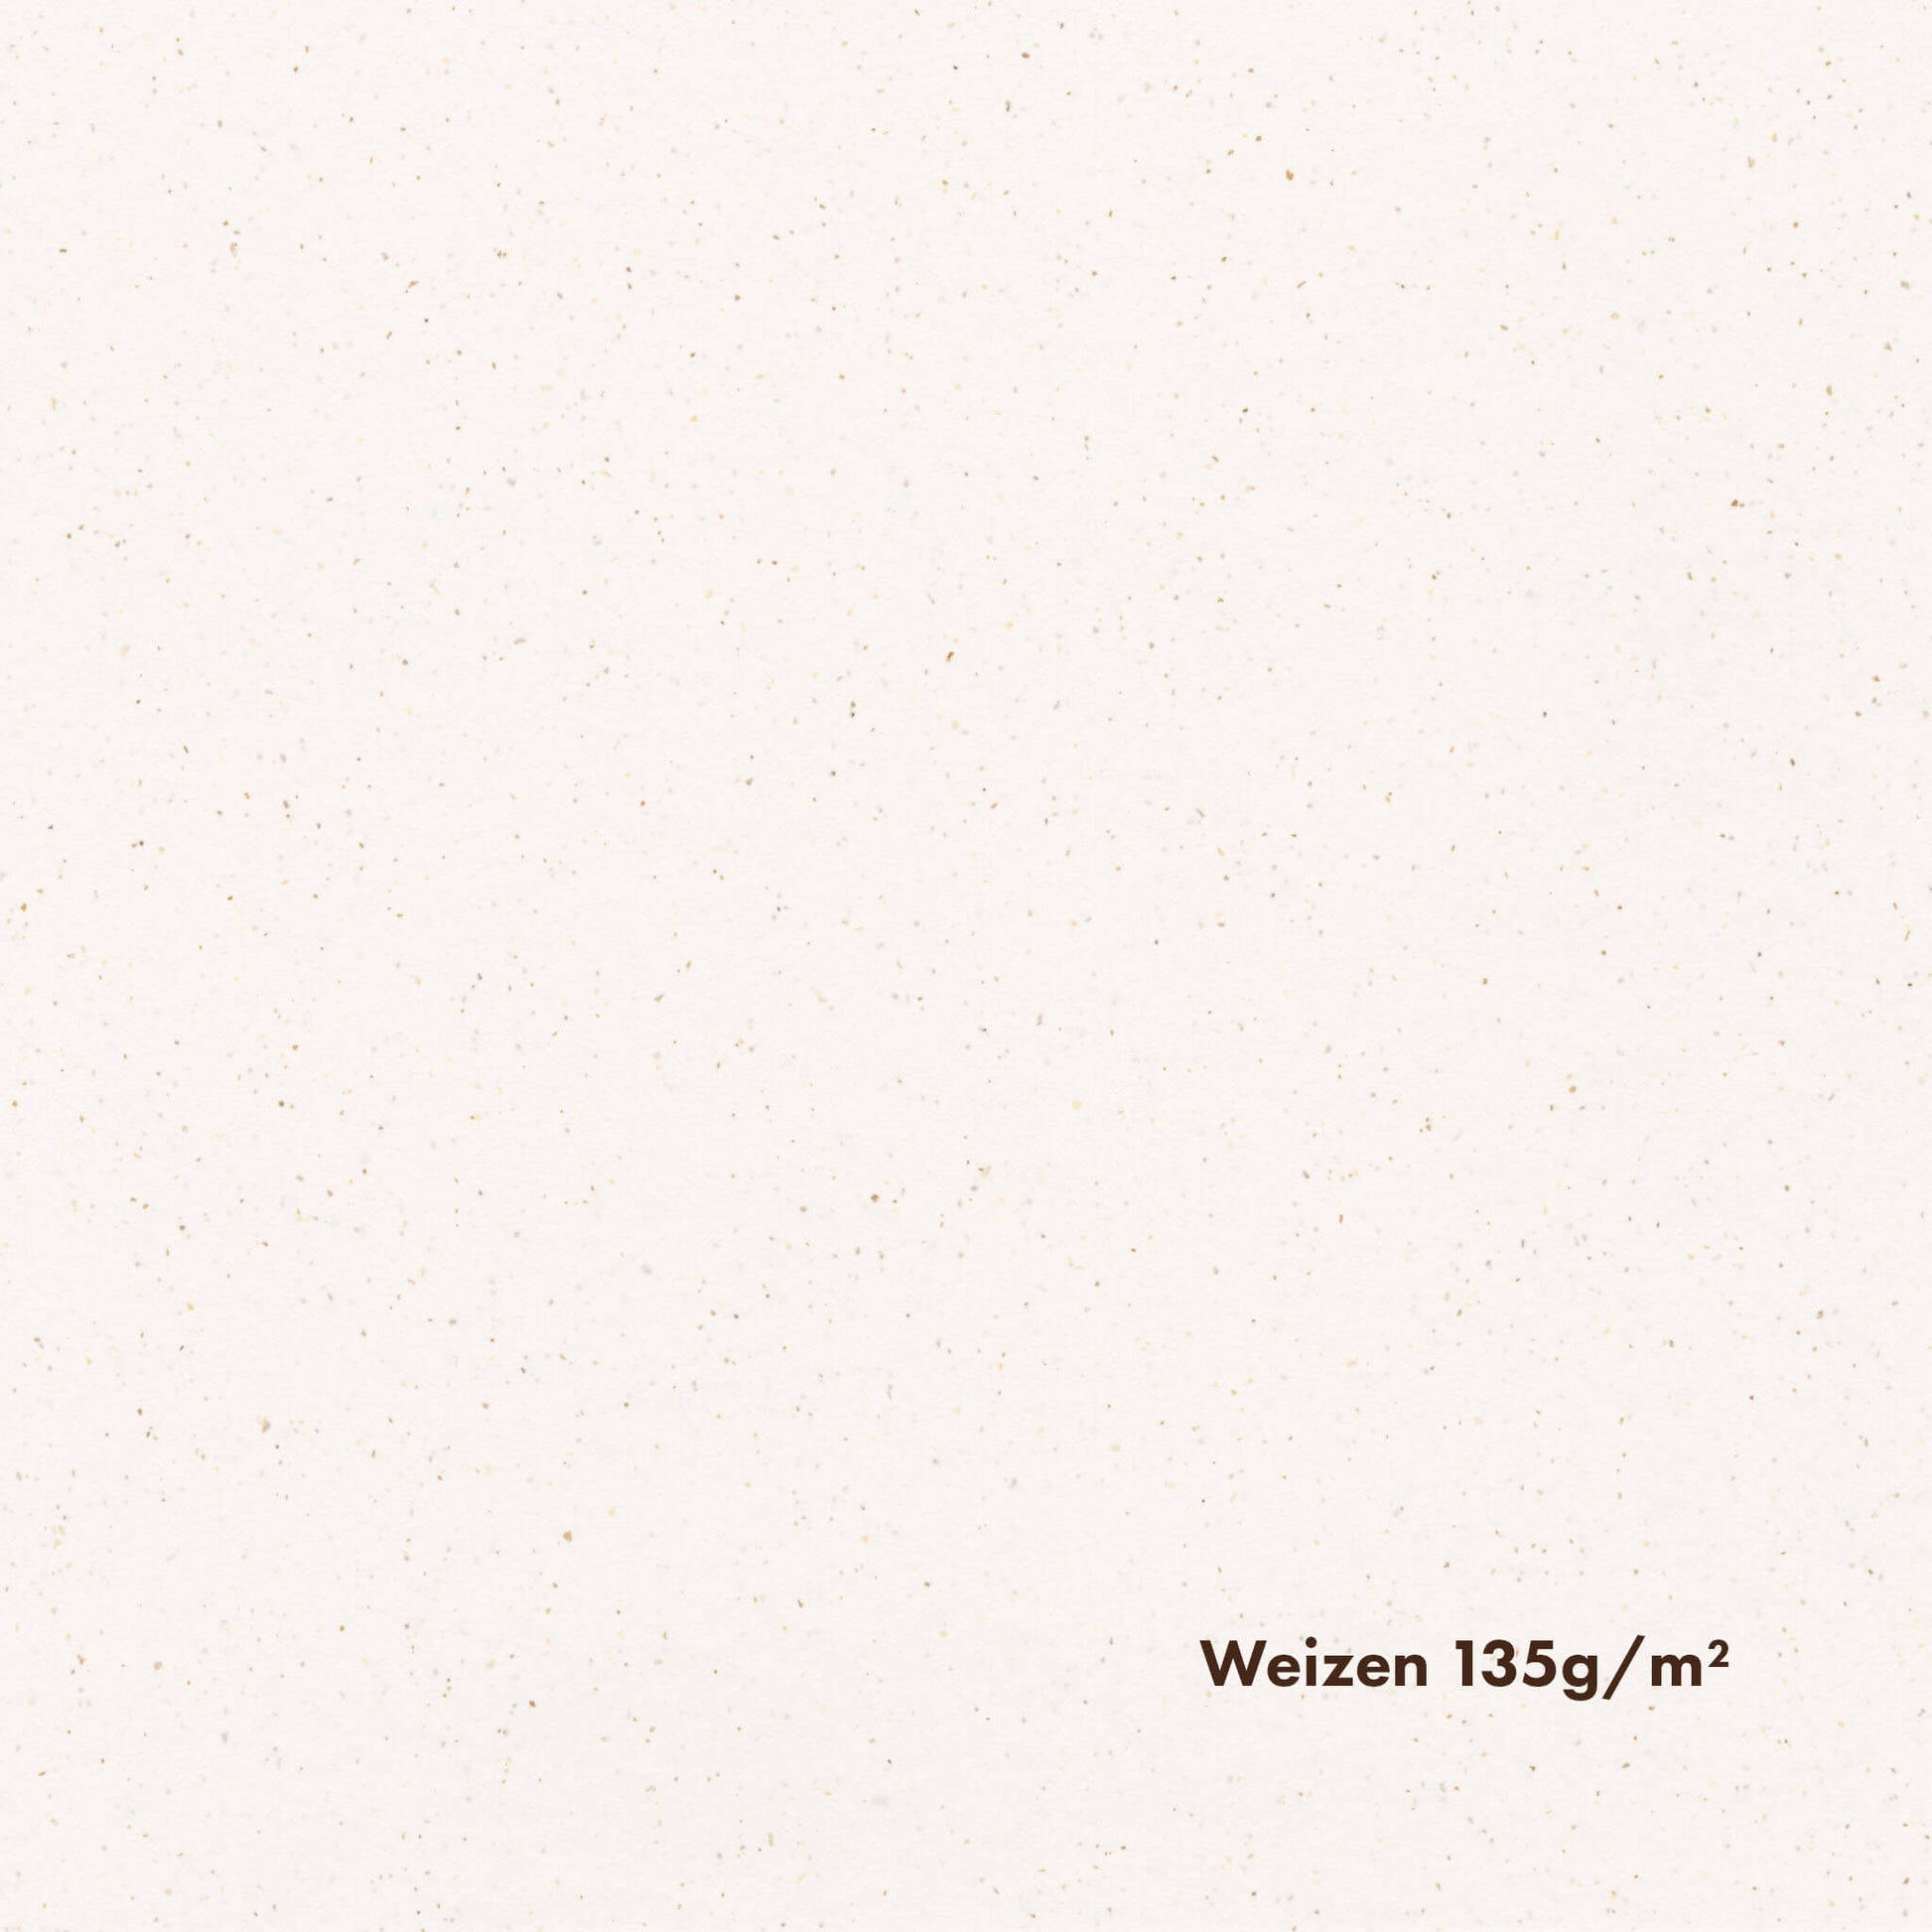 Close-up of white toned pulp paper with distinct brownish speckles throughout. The text 'Weizen 135g/m2' is typed on the paper.